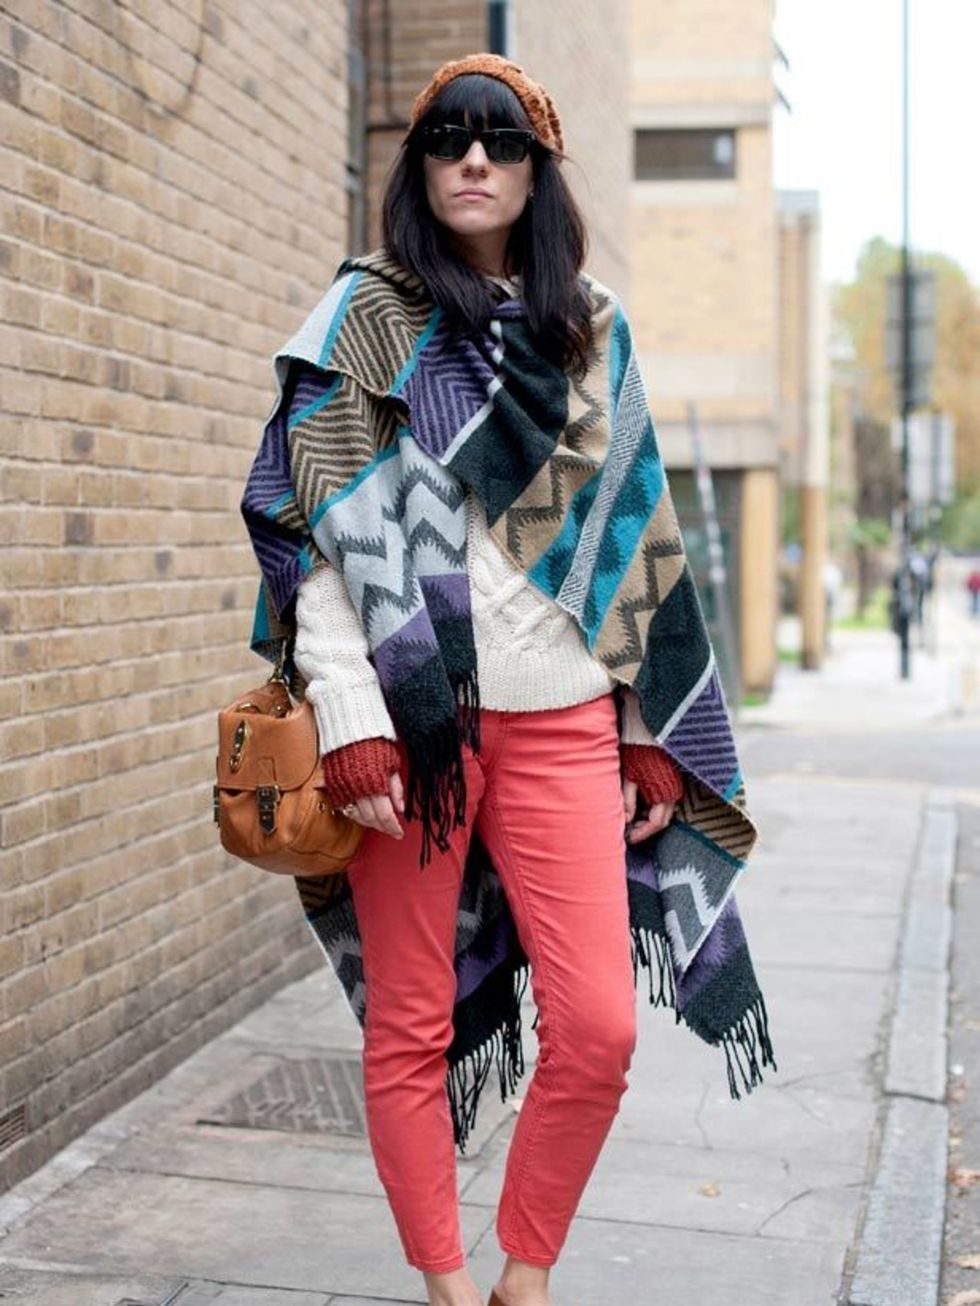 <p>Photo by Kirstin SinclairStephanie, 27, Marketing Manager. Vintage jumper, Dorothy Perkins, Urban Outfitters shoes and scarf, Mulberry bag, Ray Ban shades, Asos hat.</p>